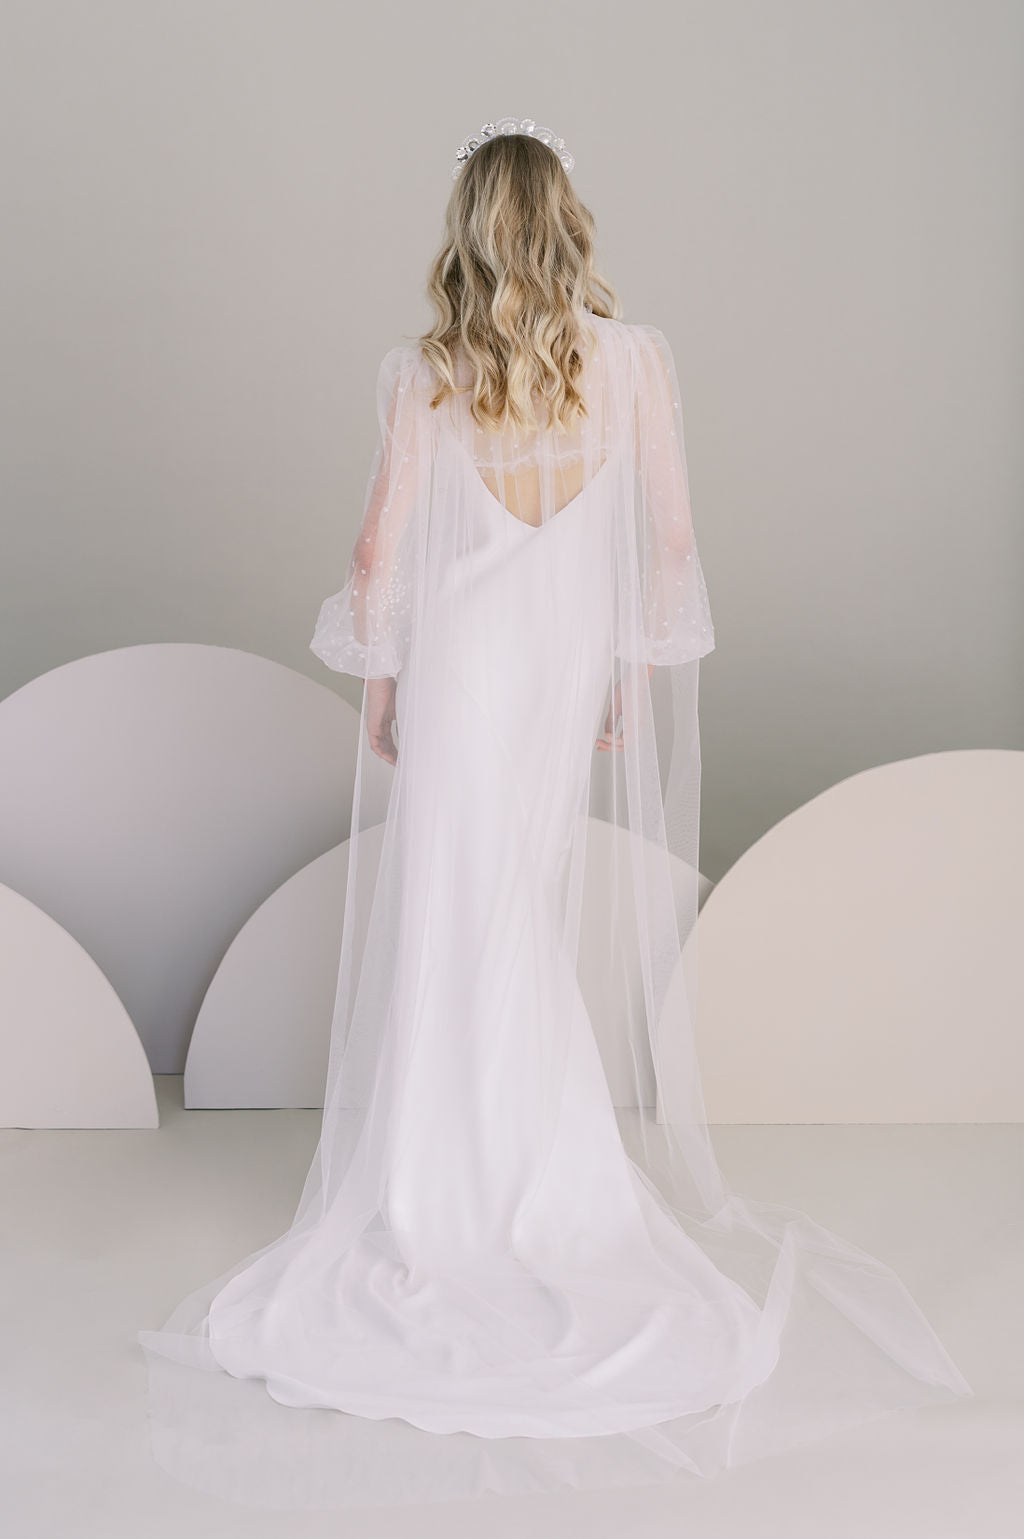 Long sequin wedding cape. Long poet sleeves. Handmade by Catherine Langlois, Toronto, Canada